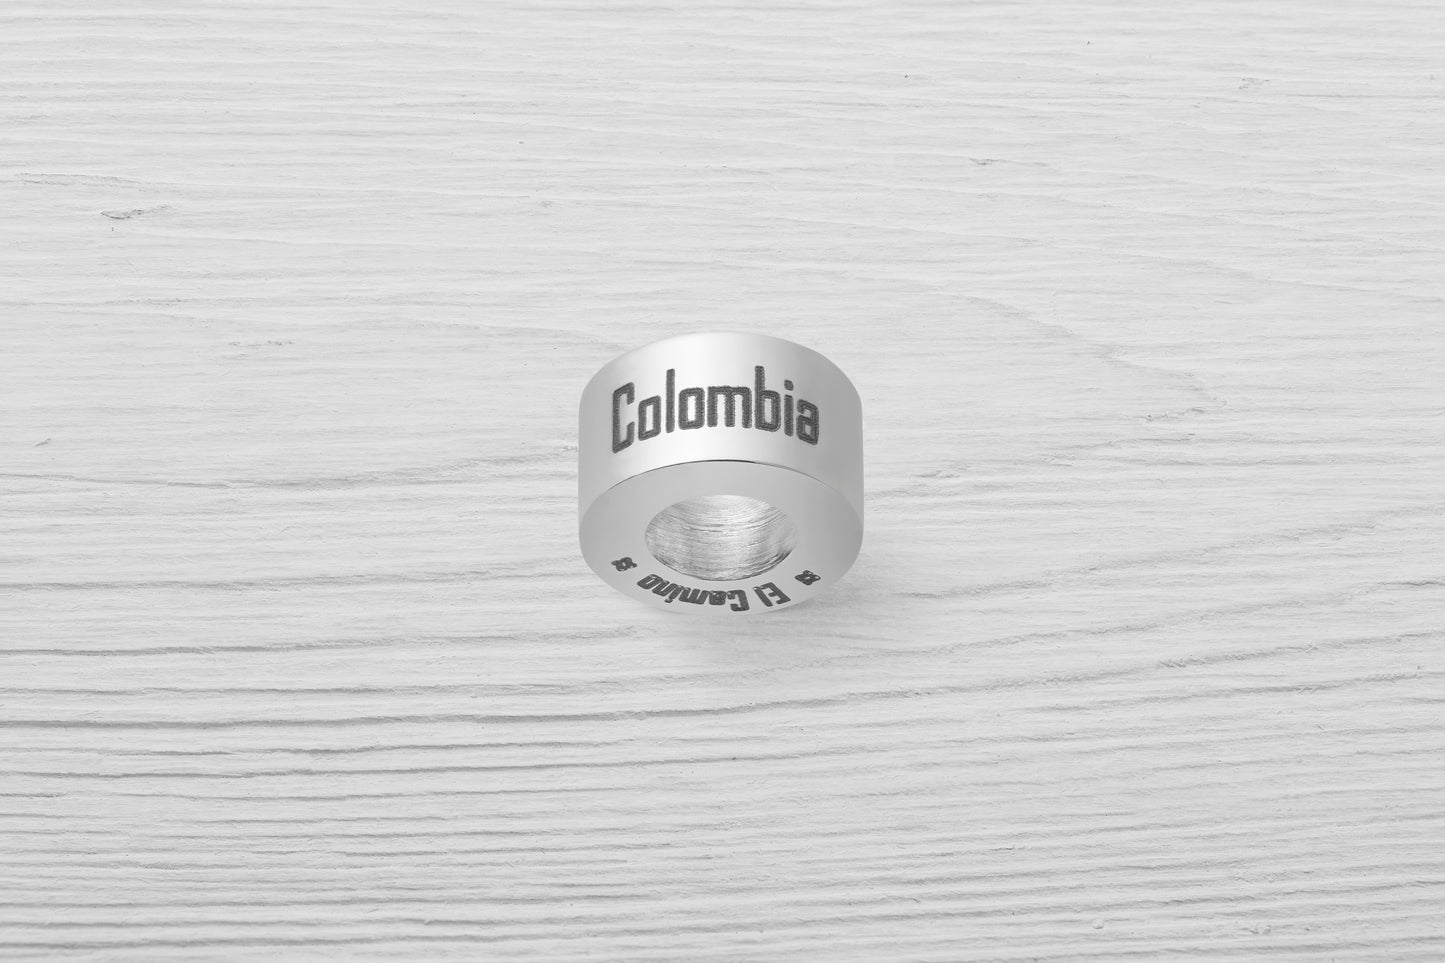 El Camino Colombia Country Step Travel Charm Bead